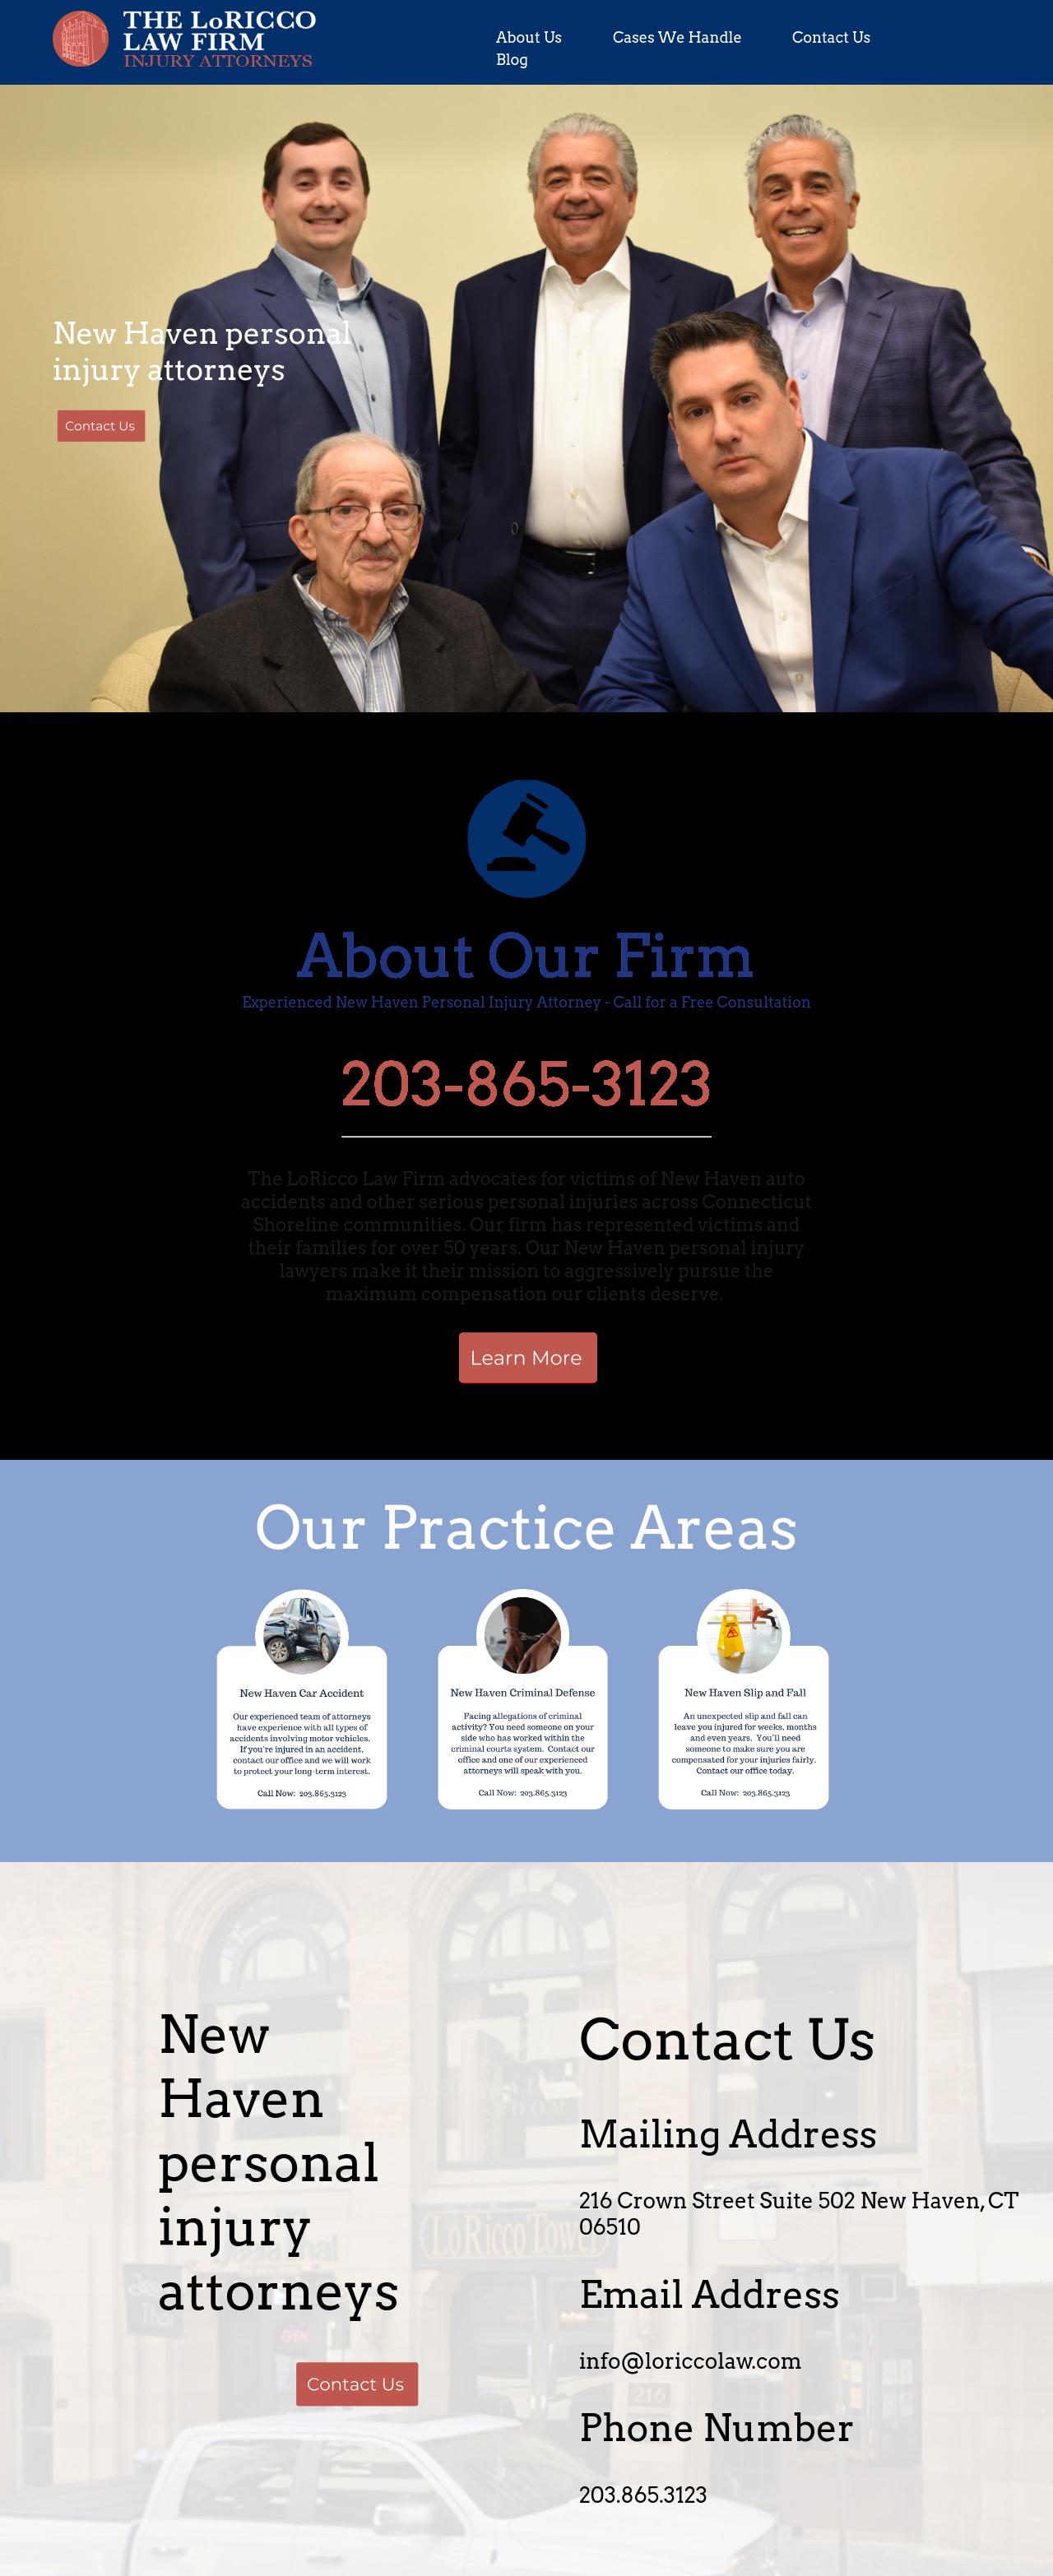 LoRicco Law Firm, LLC - New Haven CT Lawyers